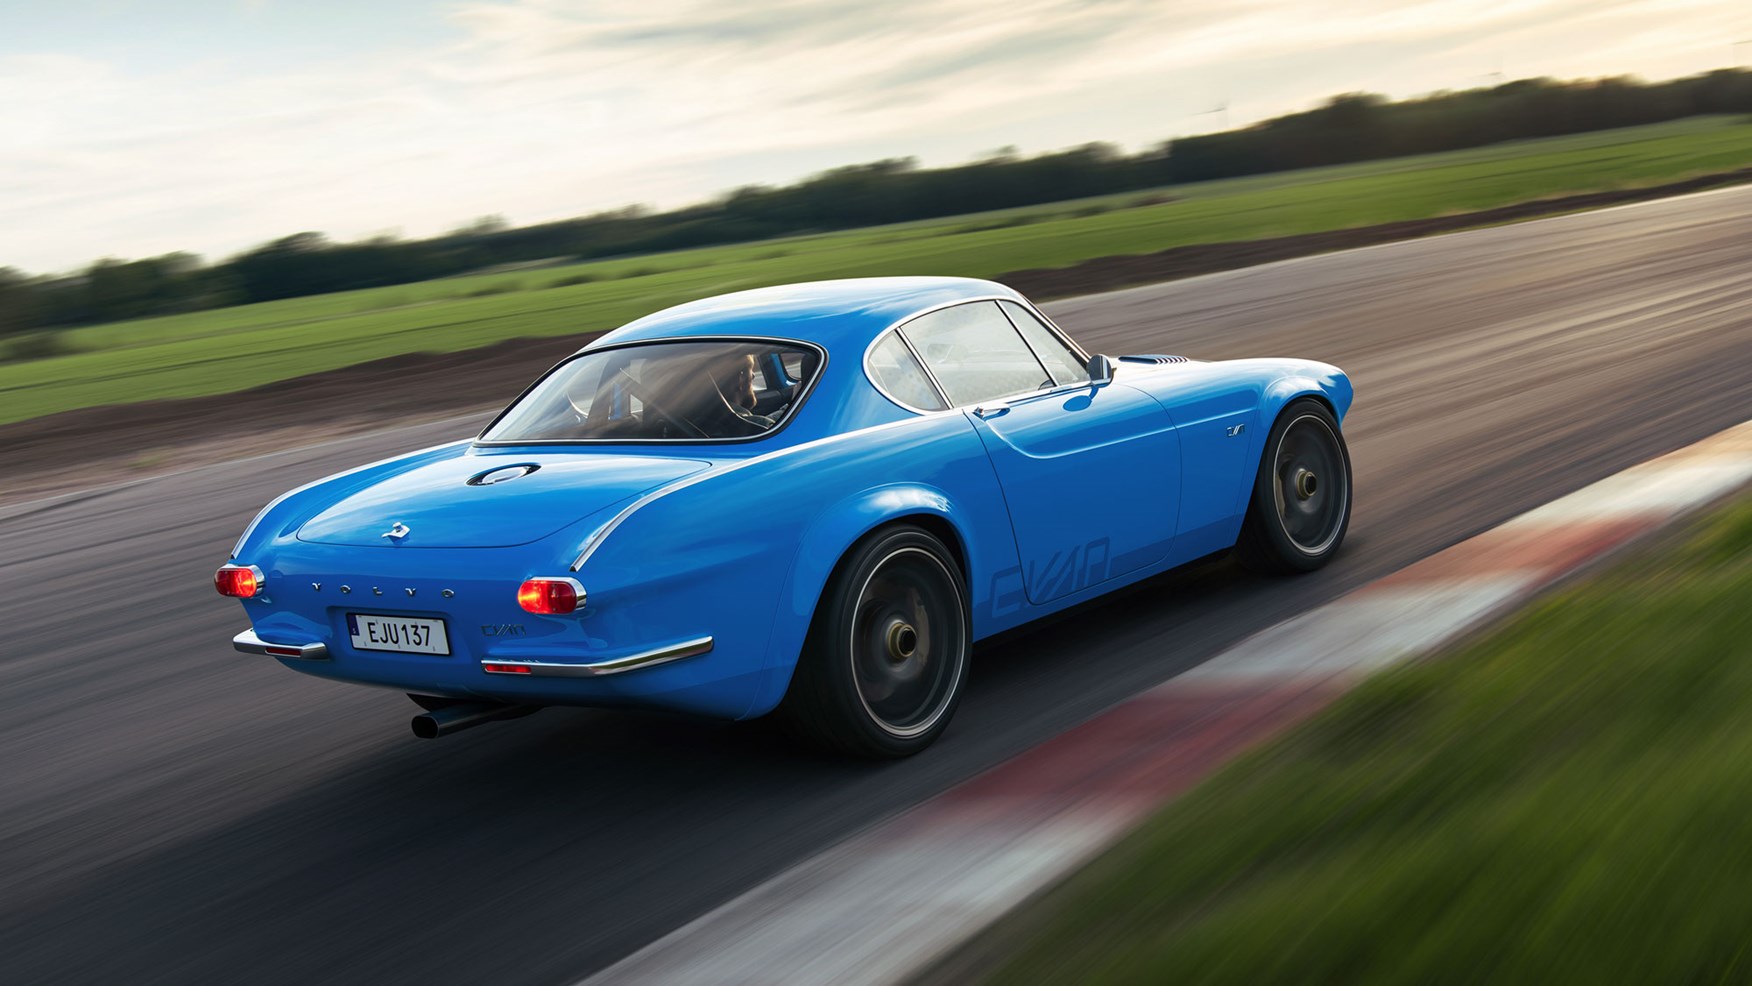 Volvo P1800 Cyan full details and spec | CAR Magazine